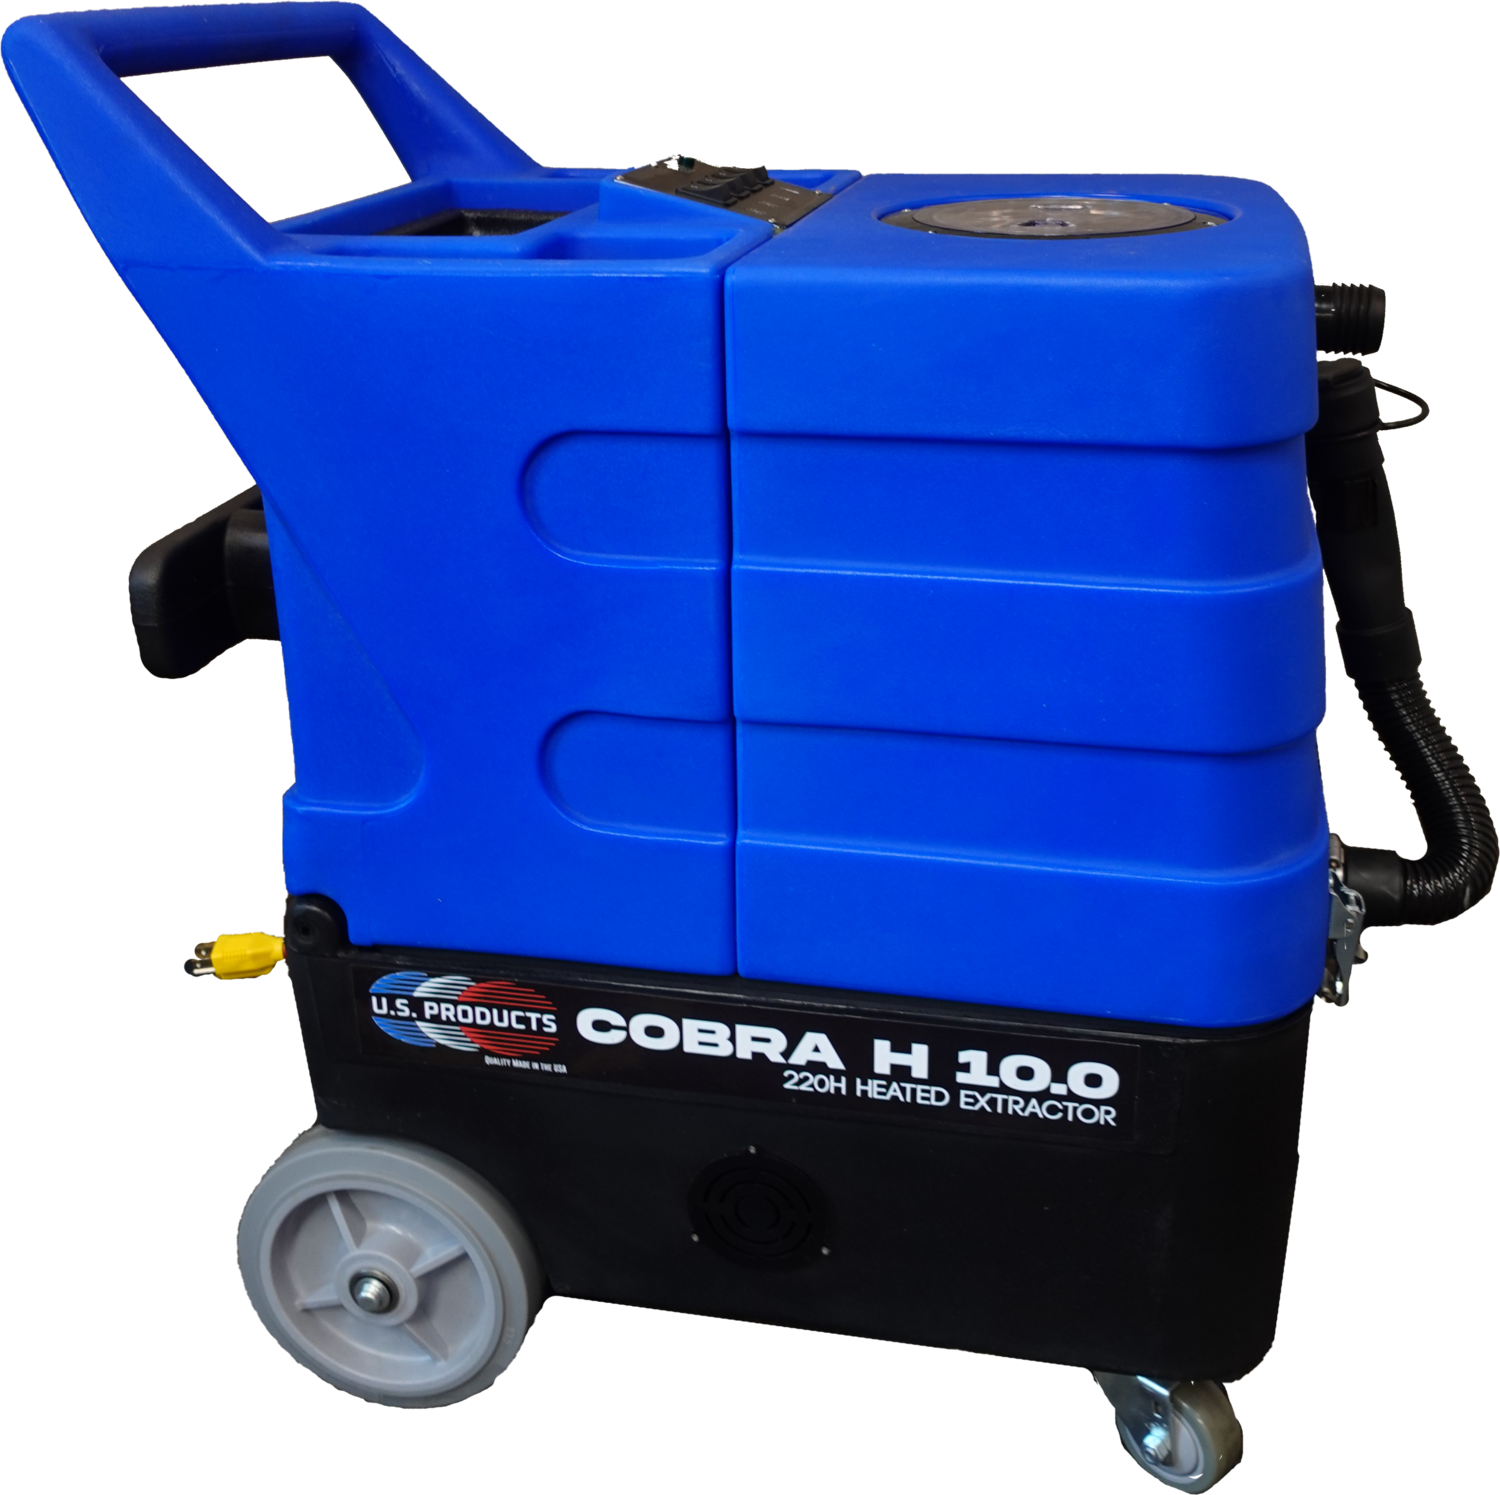 Cobra 10.0 Heated, Compact & Portable Extractor